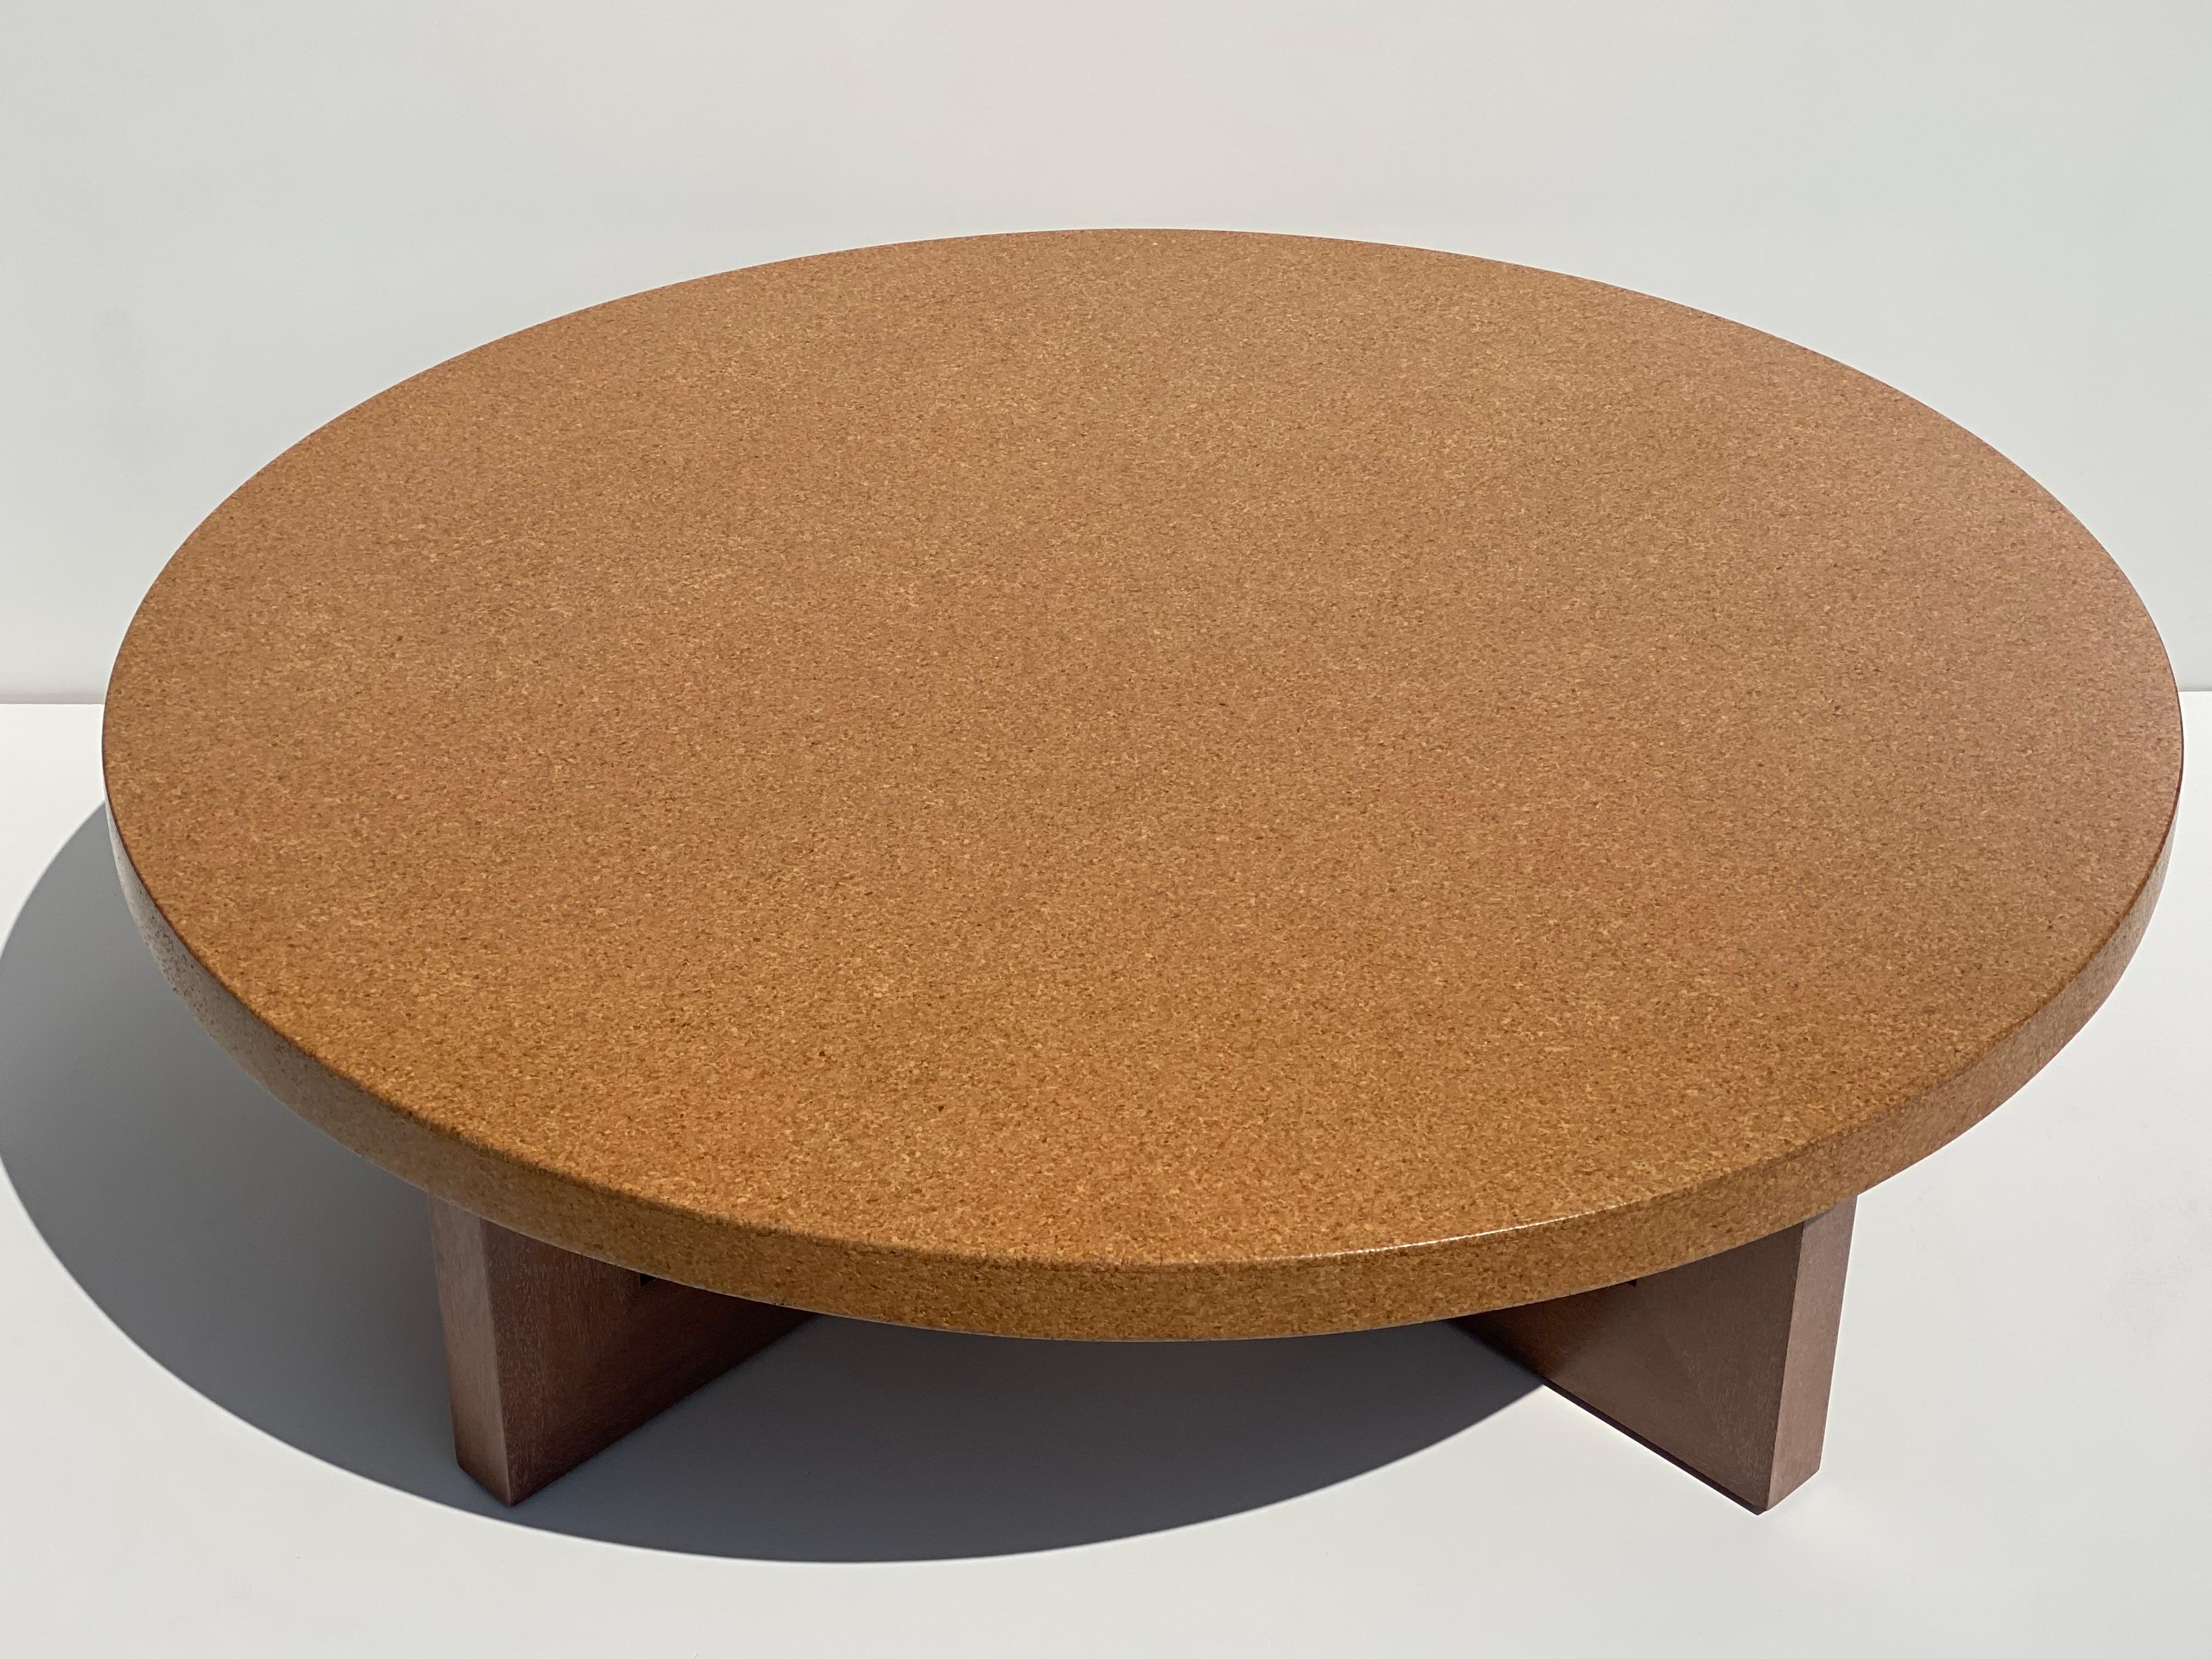 Round cork coffee table with solid mahogany legs newly made in the style of Paul Frankl